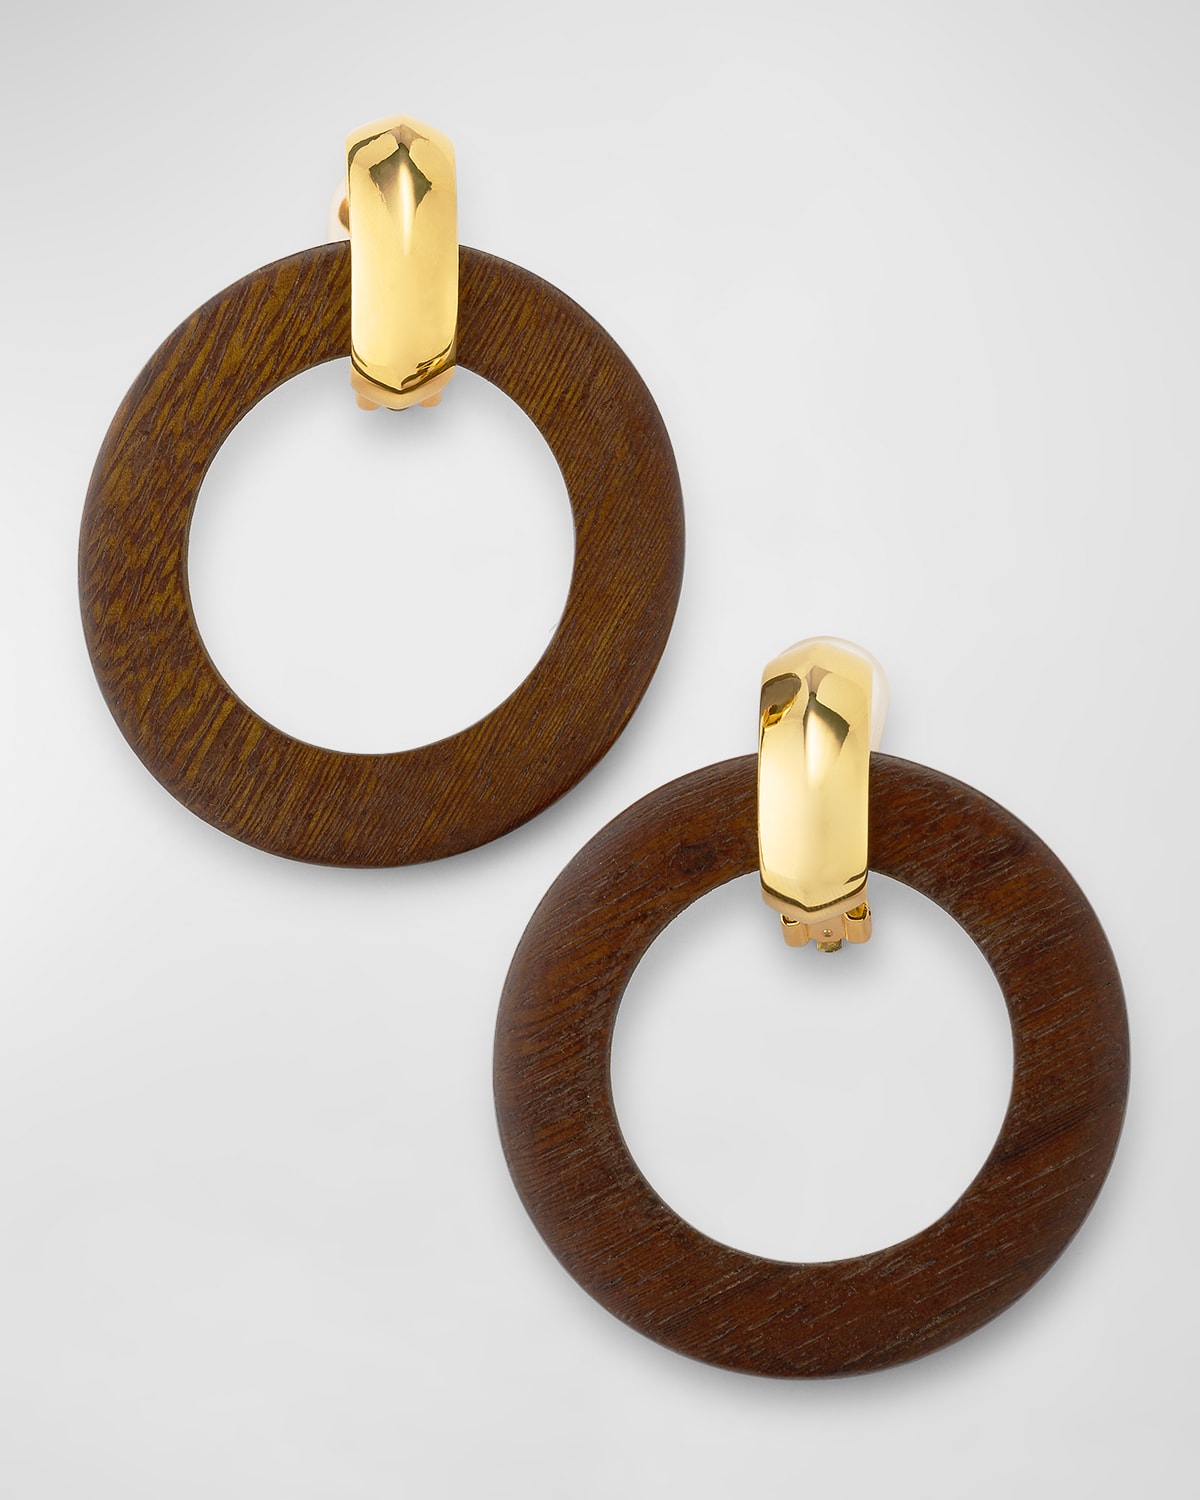 Kenneth Jay Lane Wood Ring Doorknocker Clip Earrings With Polished Top